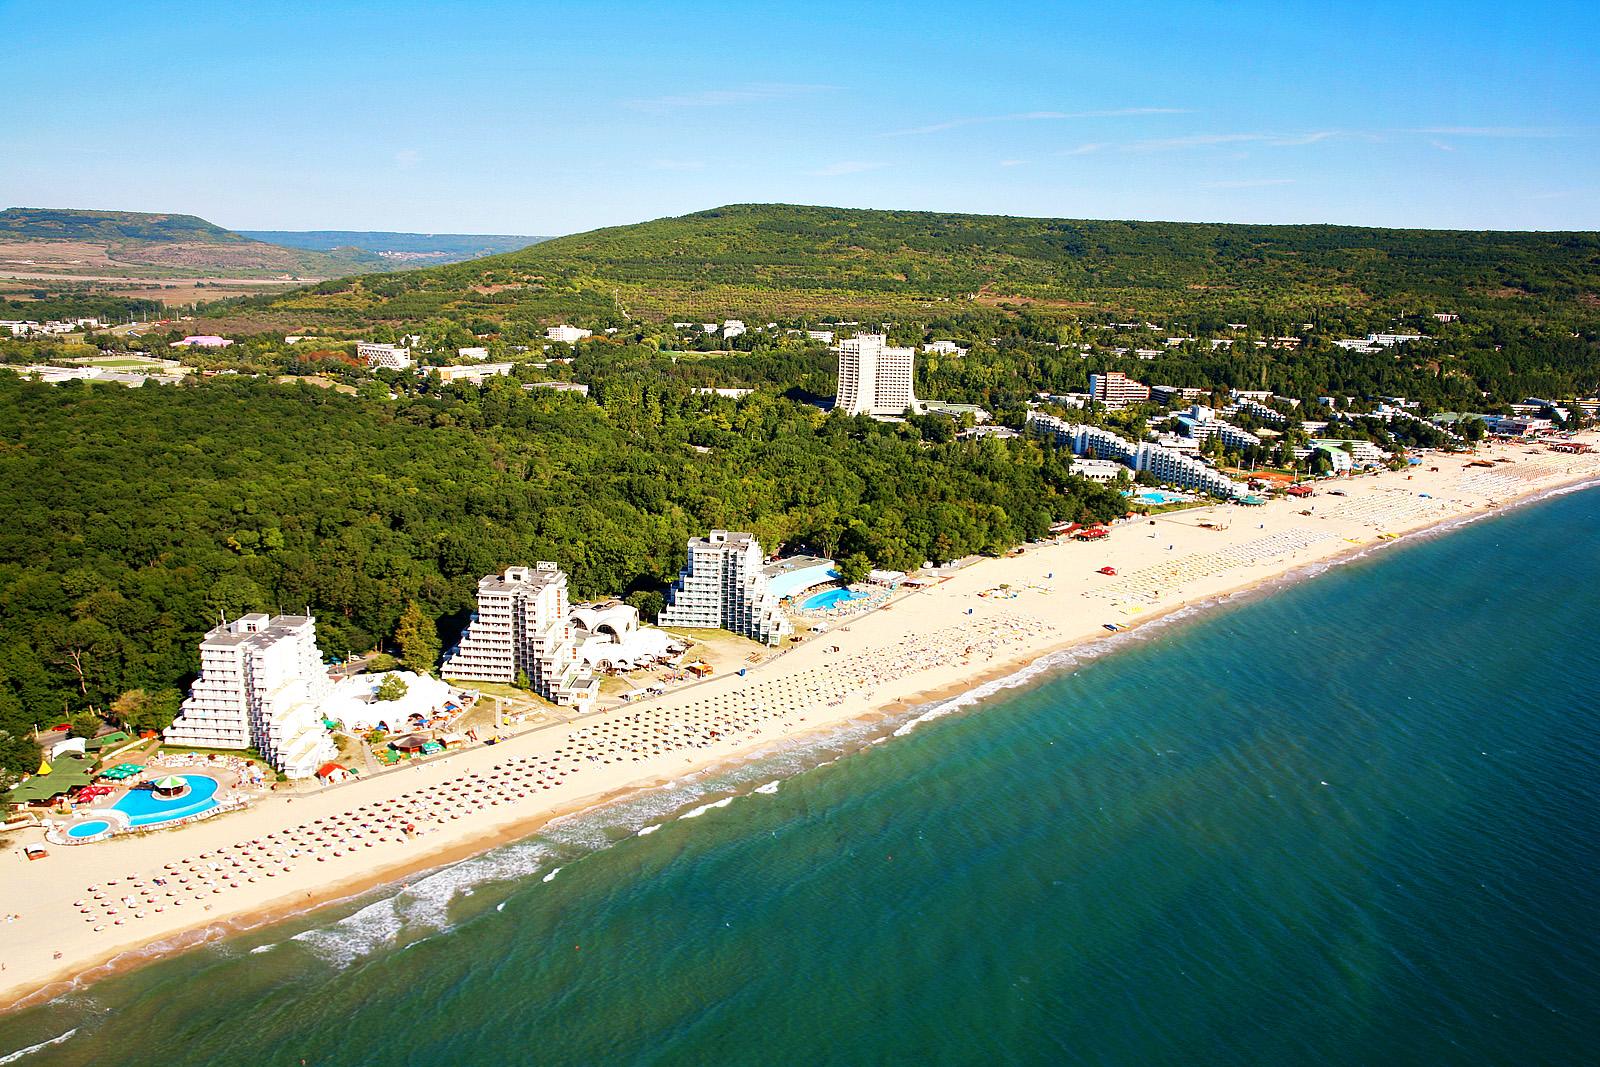 Bulgaria - a sunny destination for inexpensive holidays – image 2